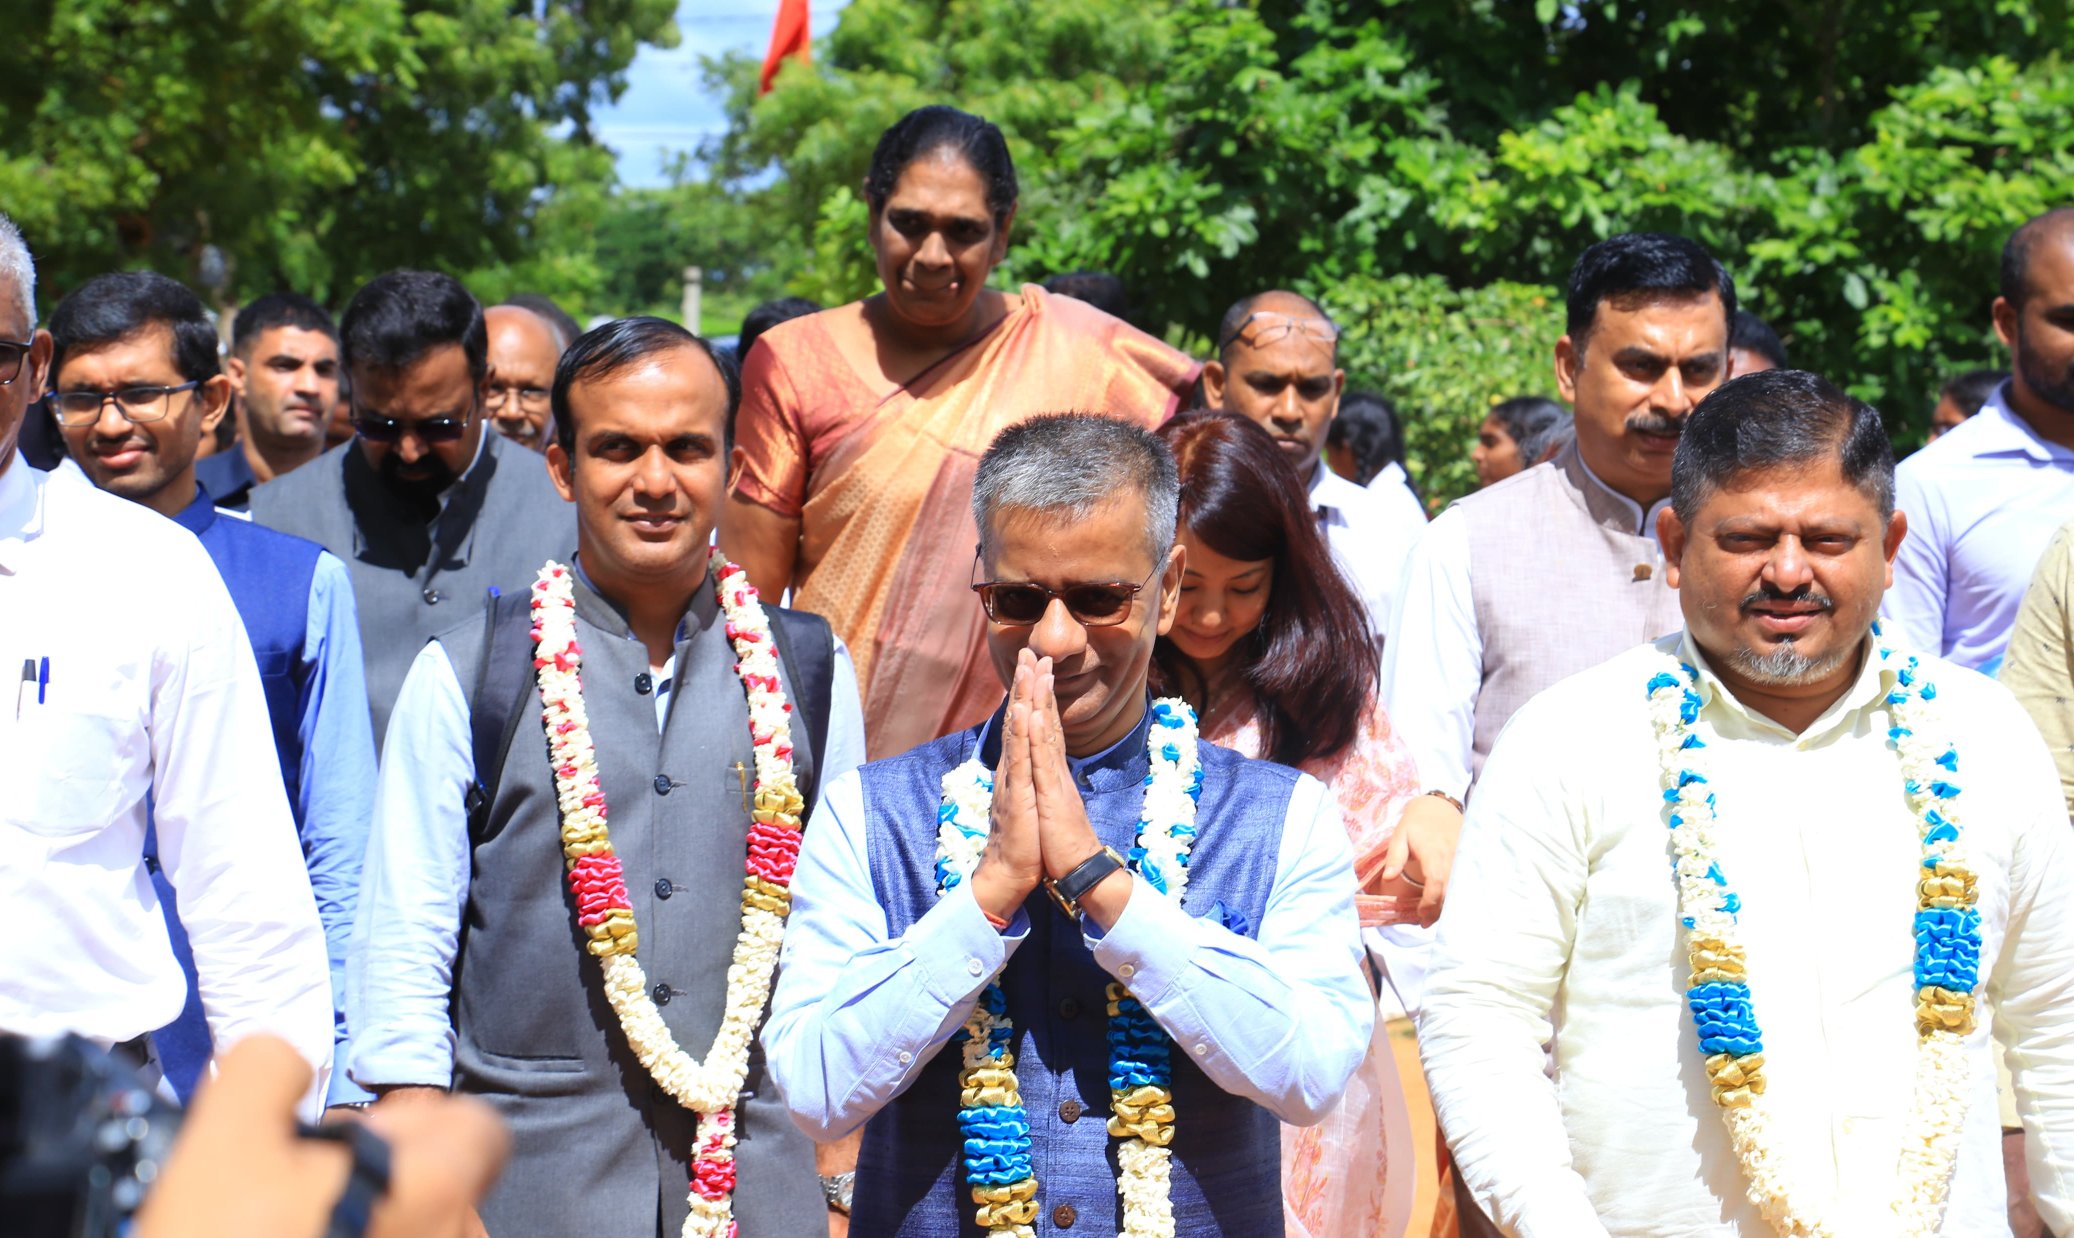 India High Commissioner’s visit to Northern Province underscores that India stands with the people of Sri Lanka